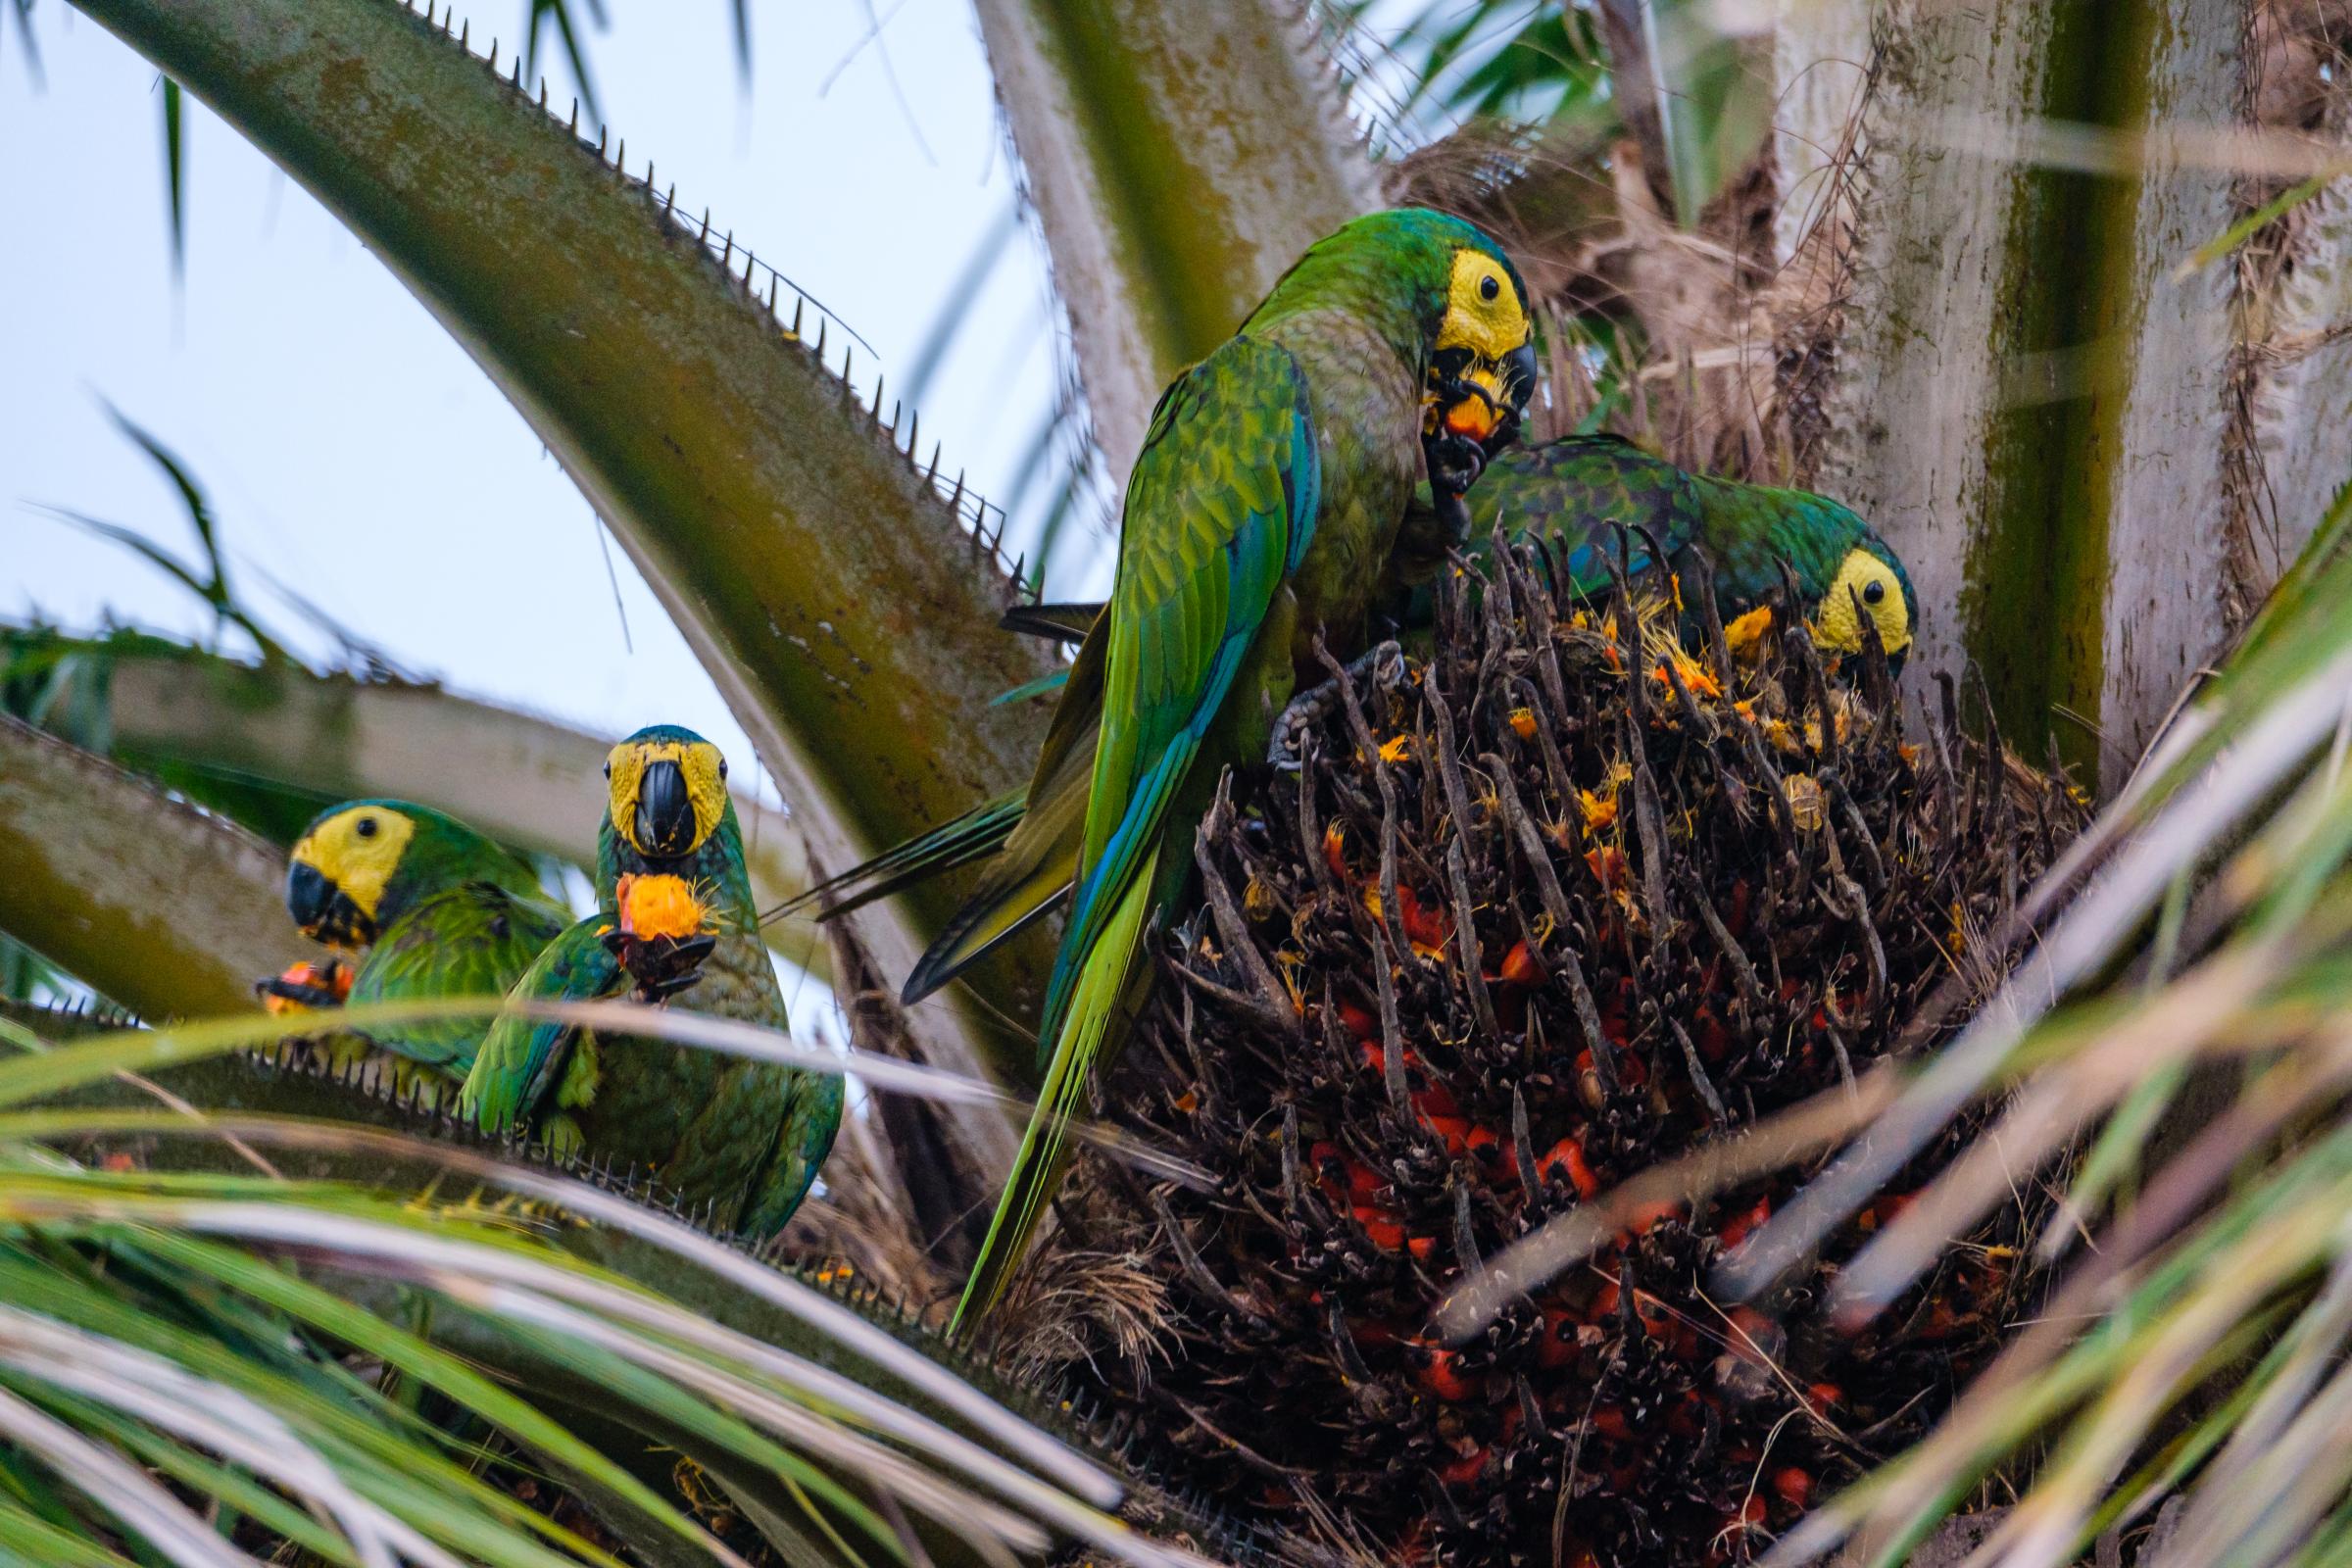 El Guaviare, Cave Paintings and Eco Tourism - Parrots, Pica Piedra, Guaviare, Colombia  